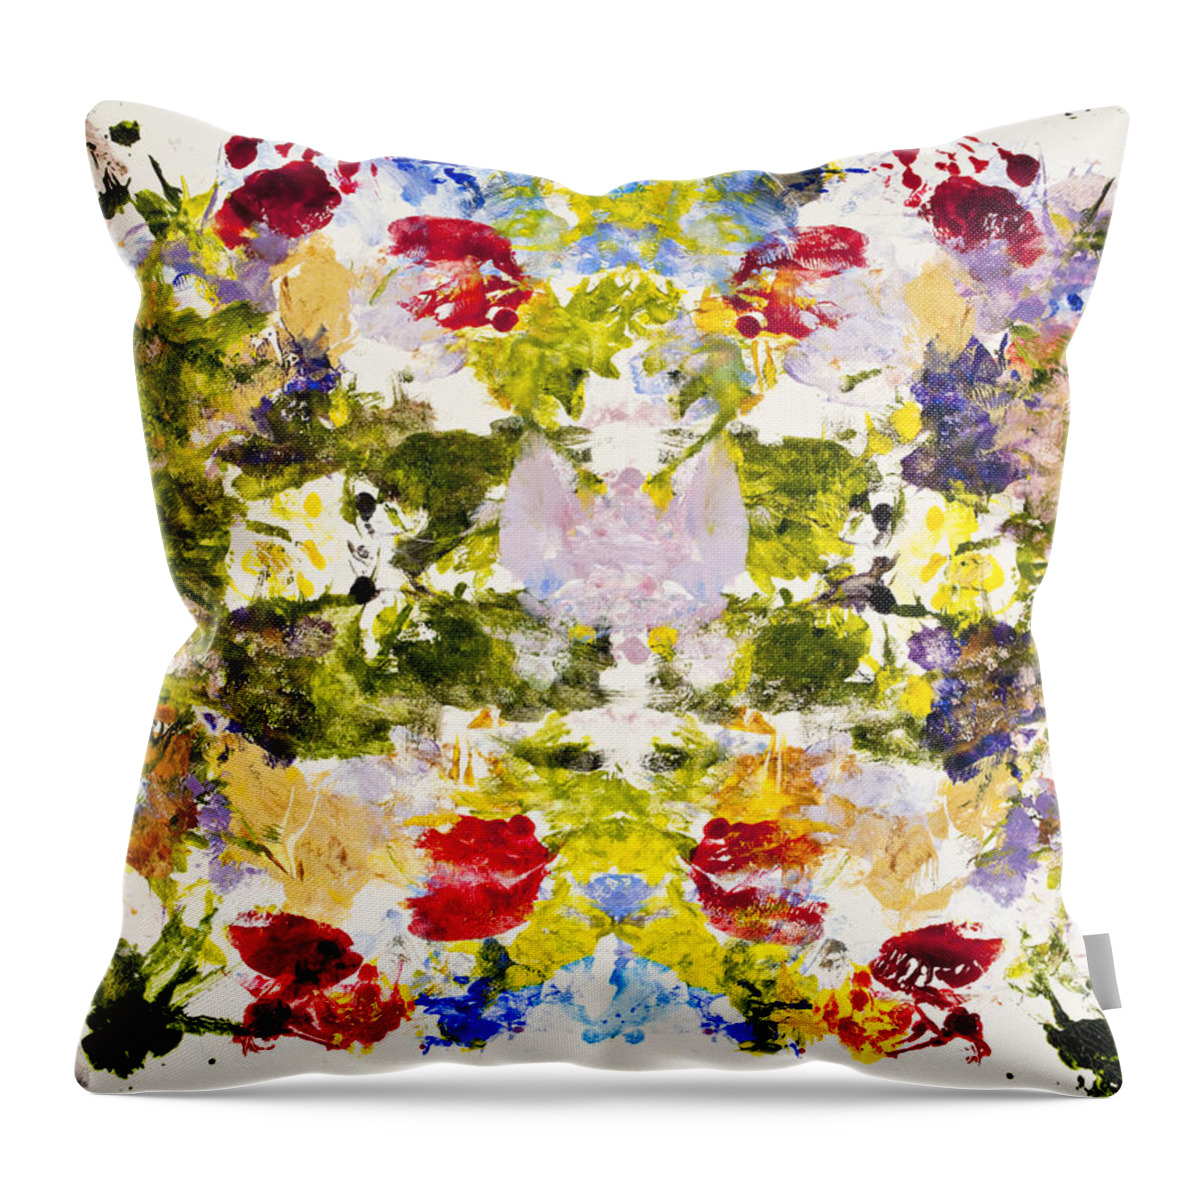 Rorschach Throw Pillow featuring the painting Rorschach Test by Darice Machel McGuire